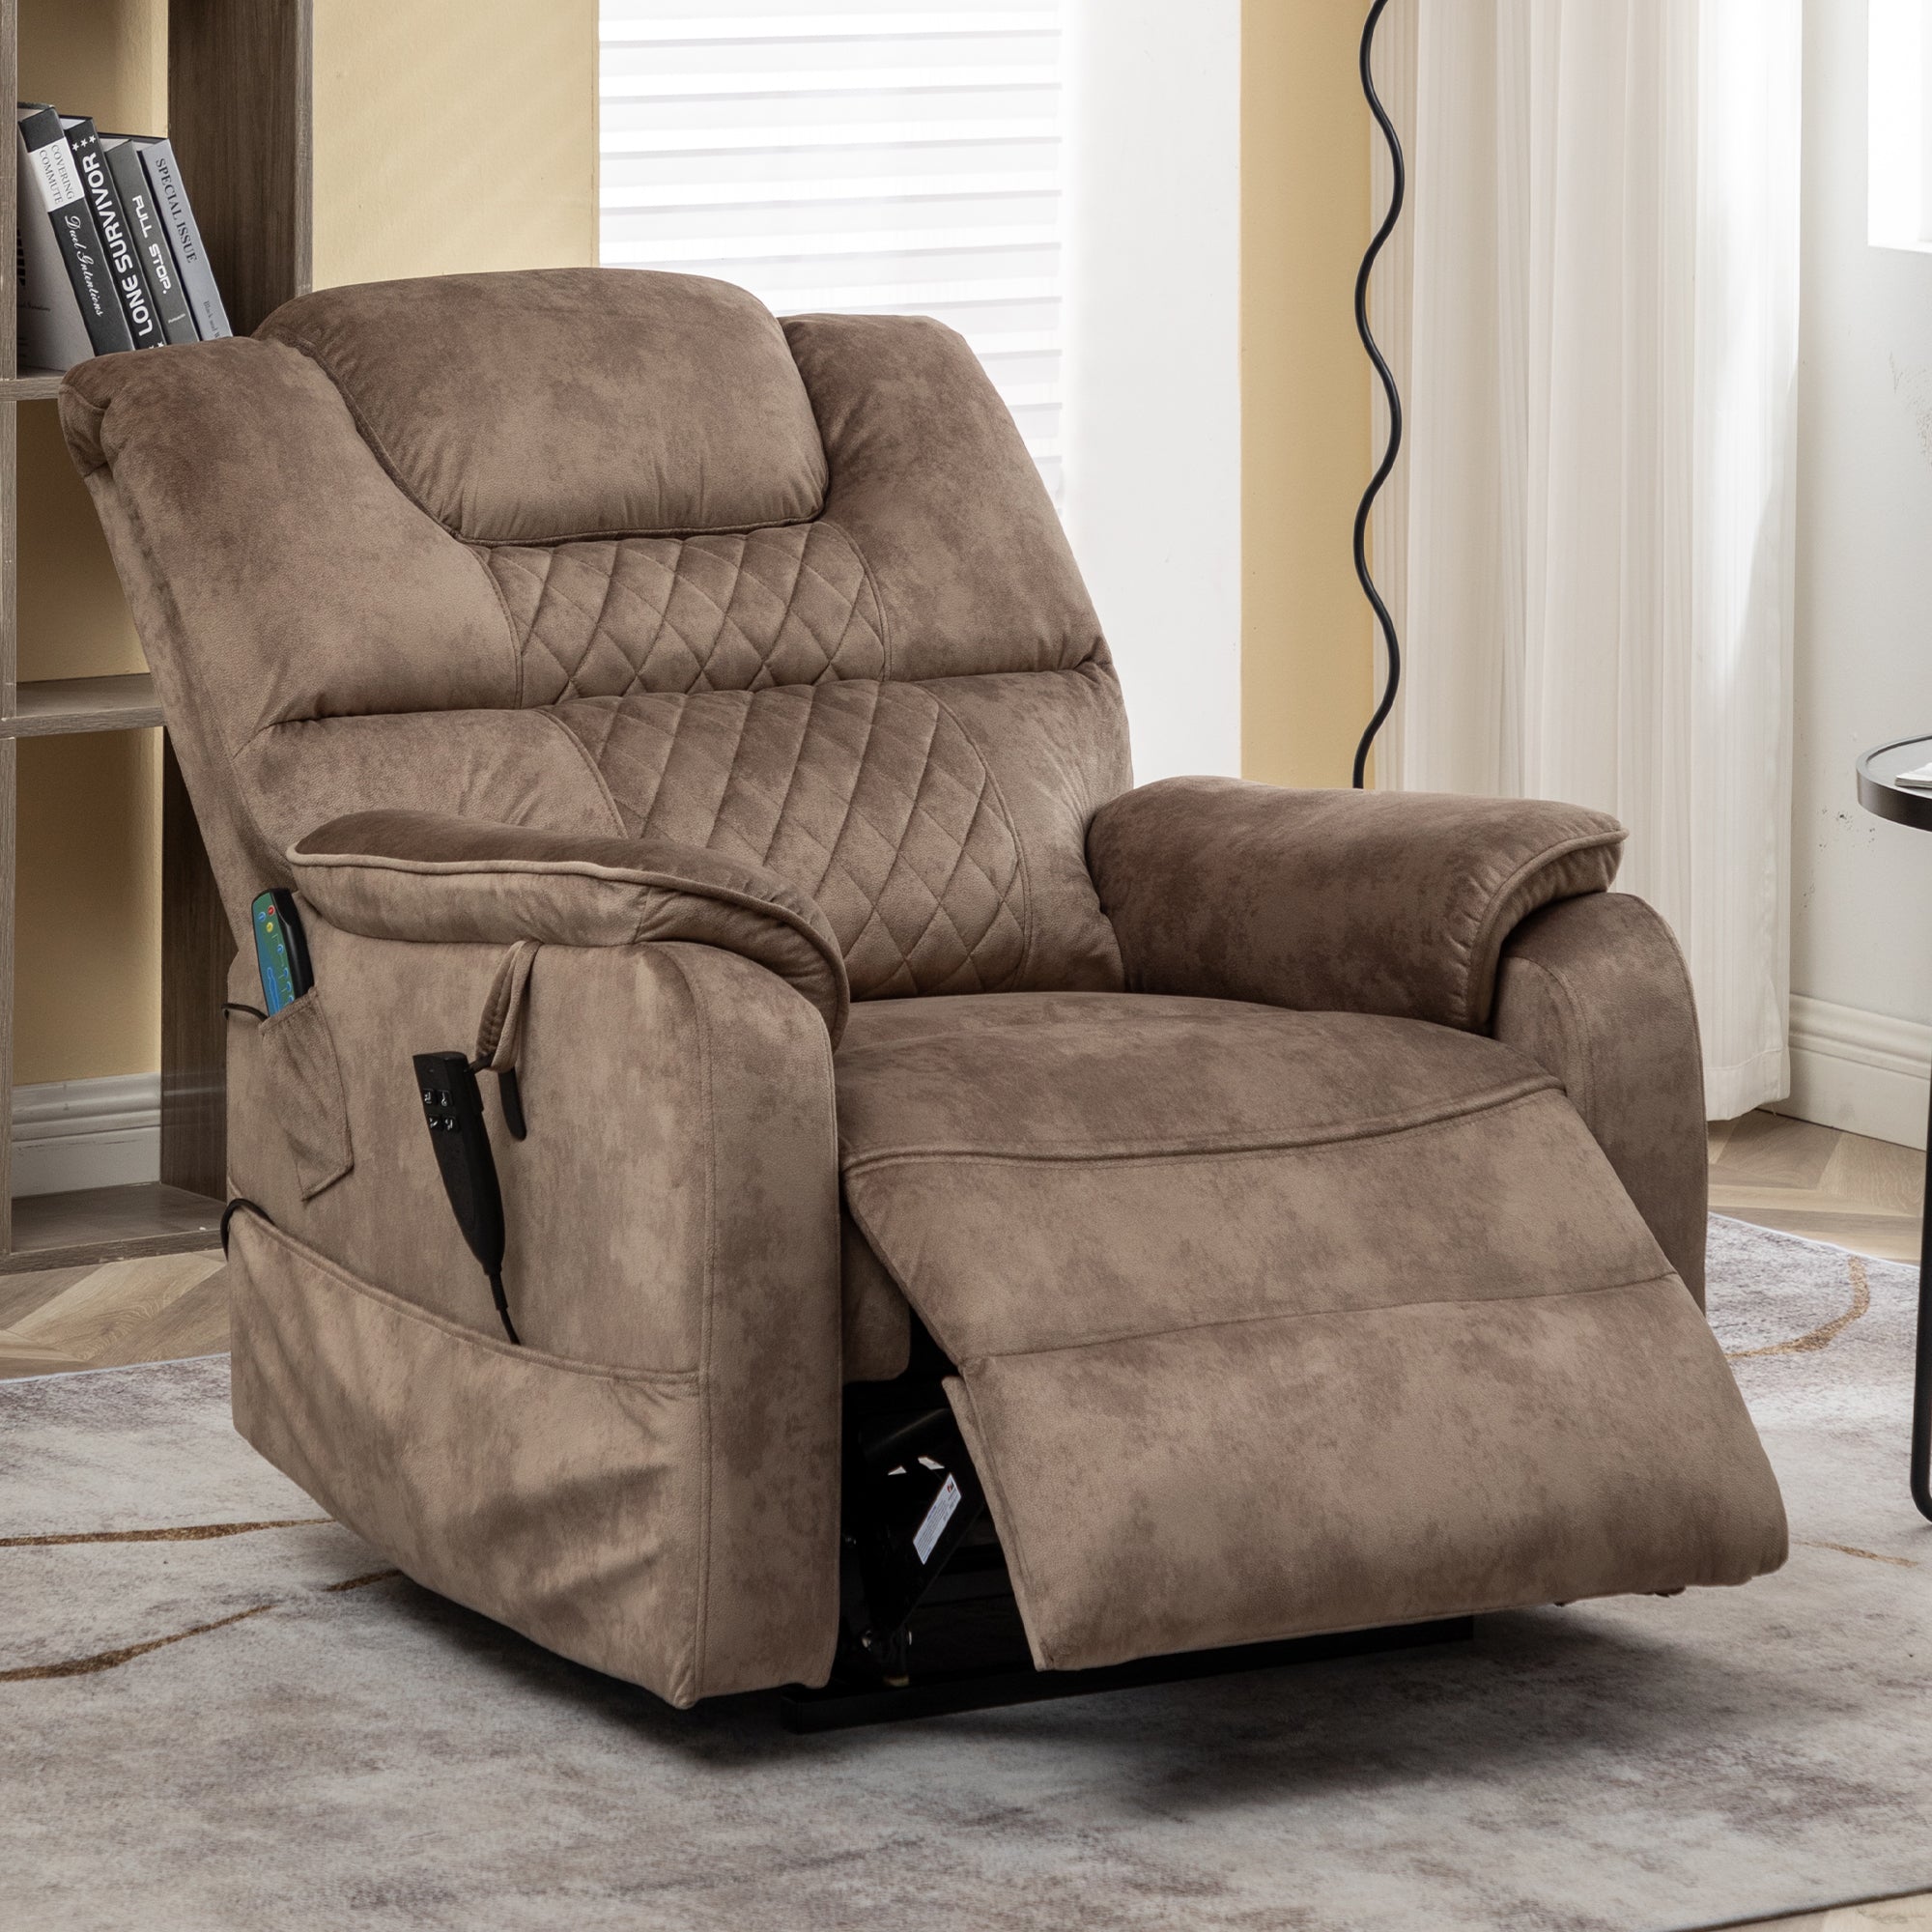 Uhomepro Large Massage Recliner Chair, Velvet Electric Heated Power Lift Recliner Chairs for Adults Oversize, Recliner Sofa 400 lb Capacity with 5